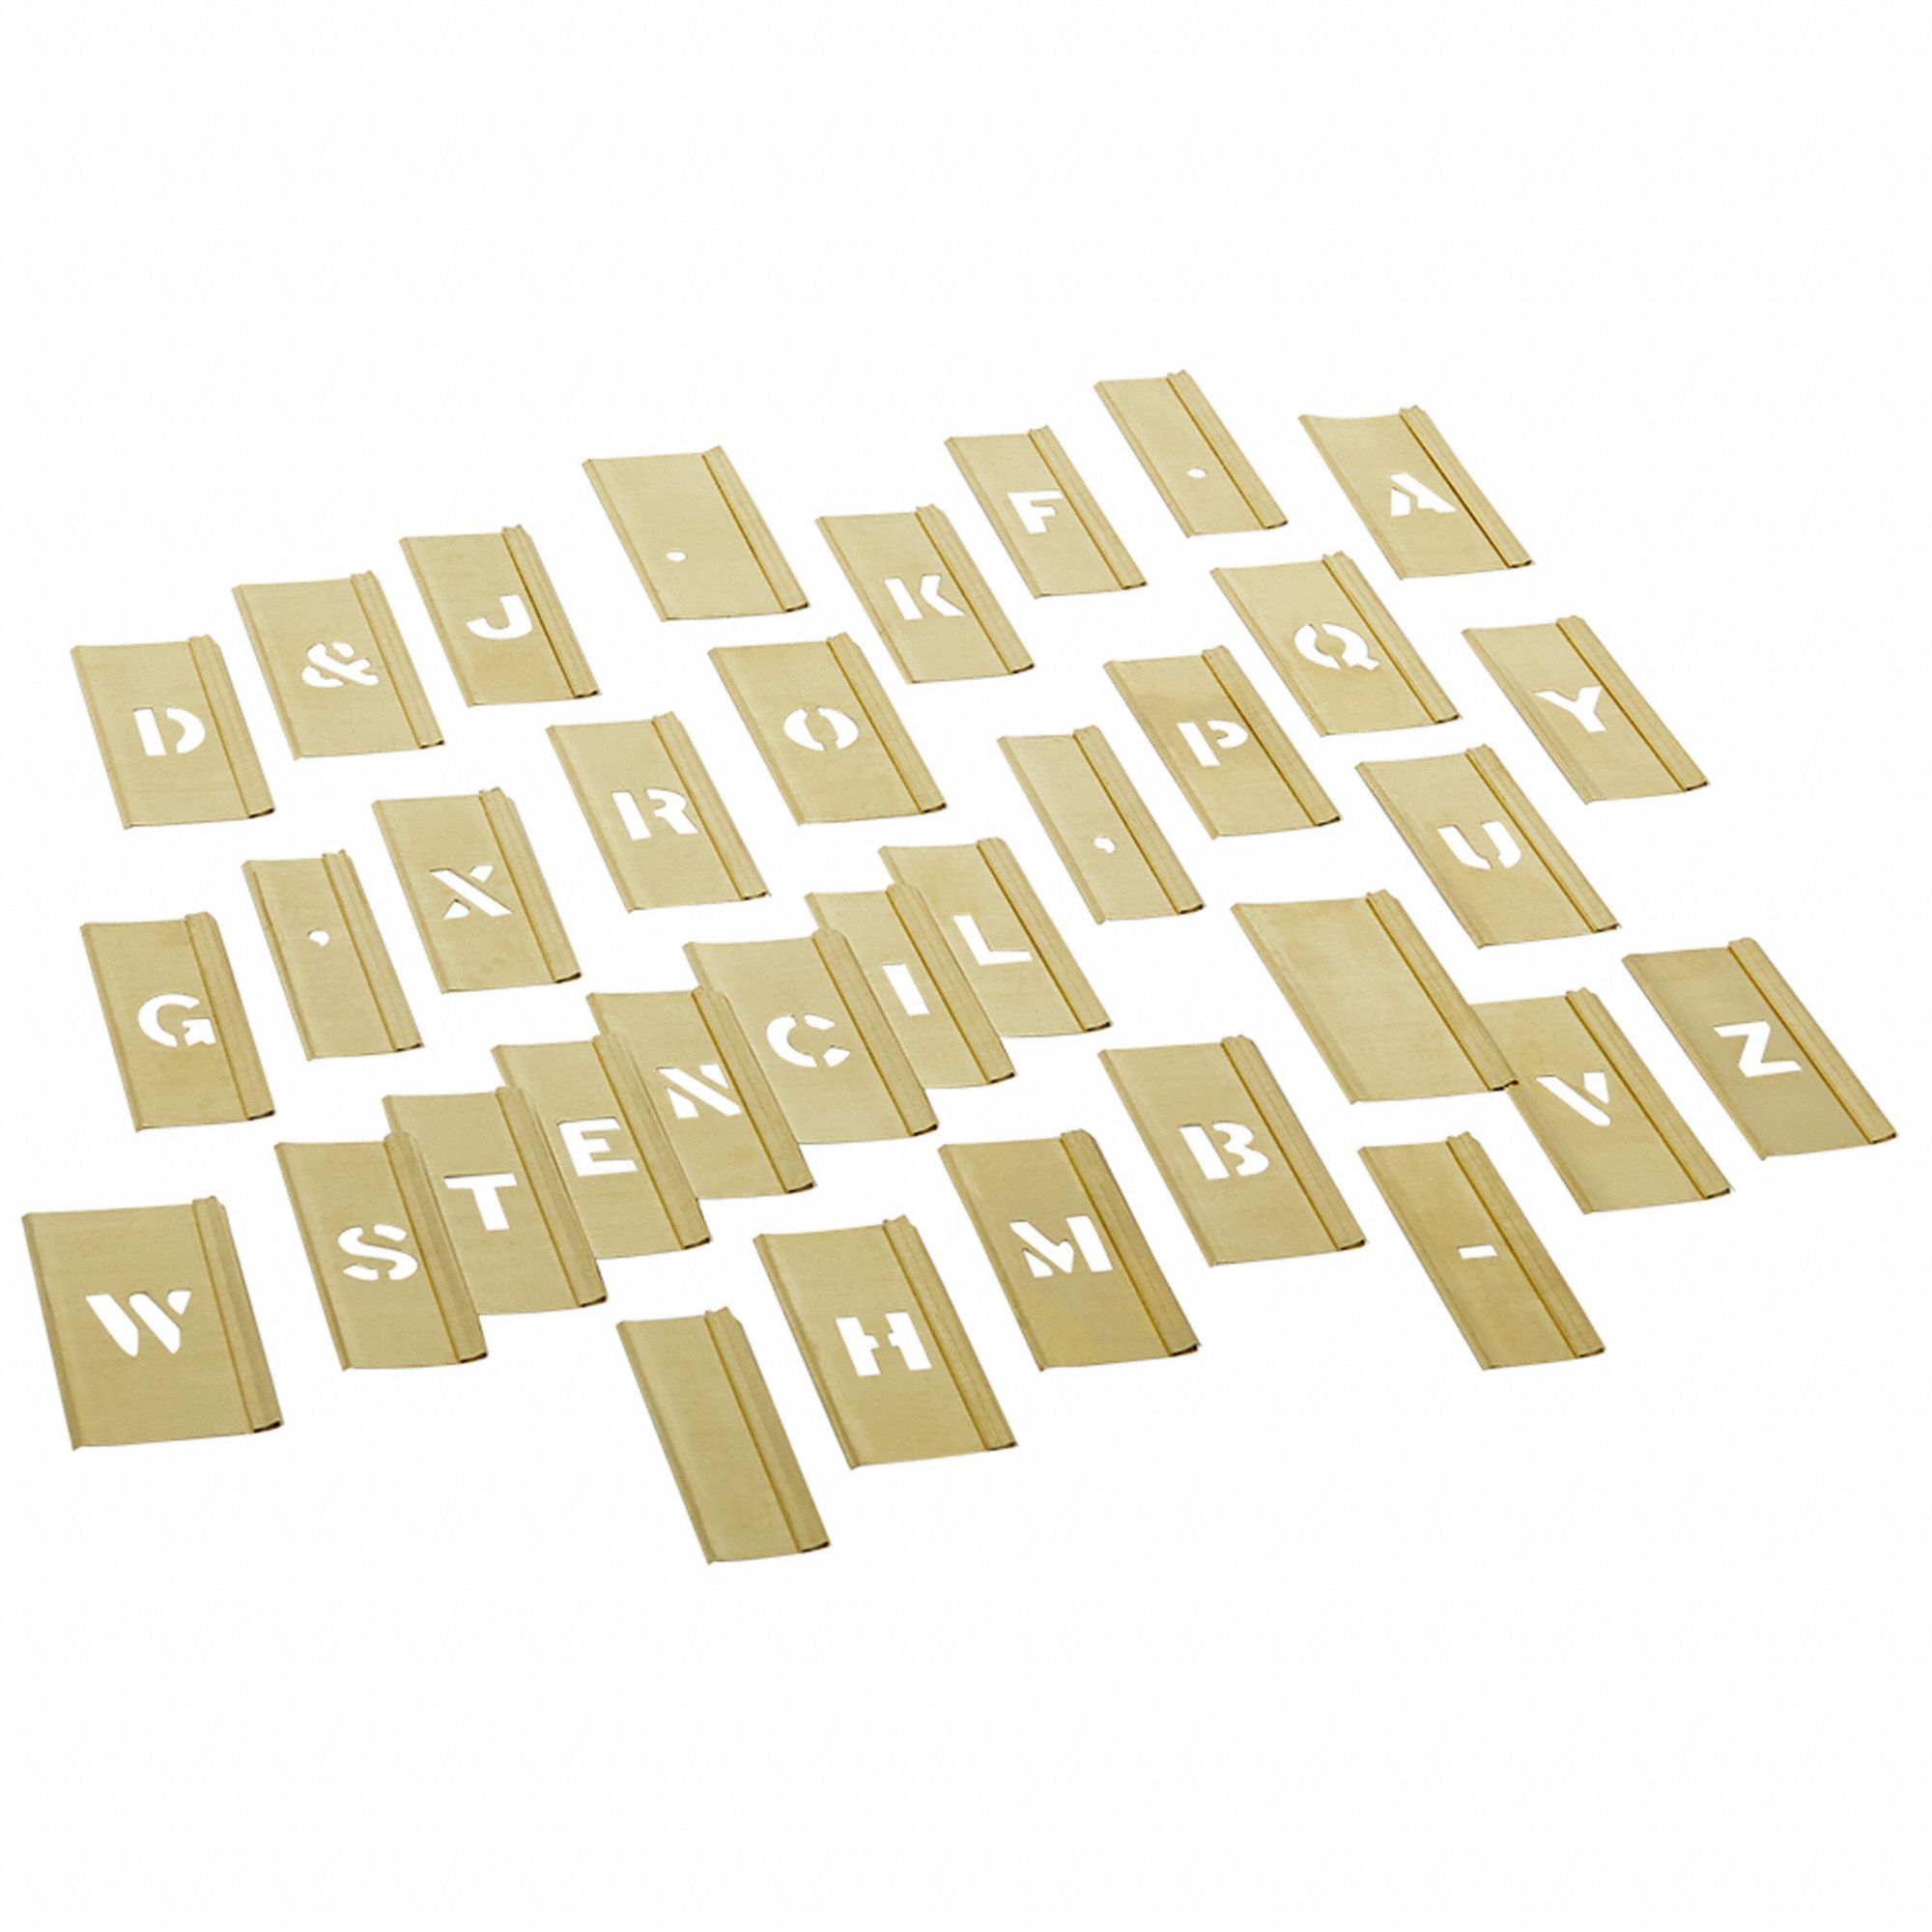 Stencil: 1/2 in Character Ht, 1/2 in Character Wd, Brass, 0.012 in Thick